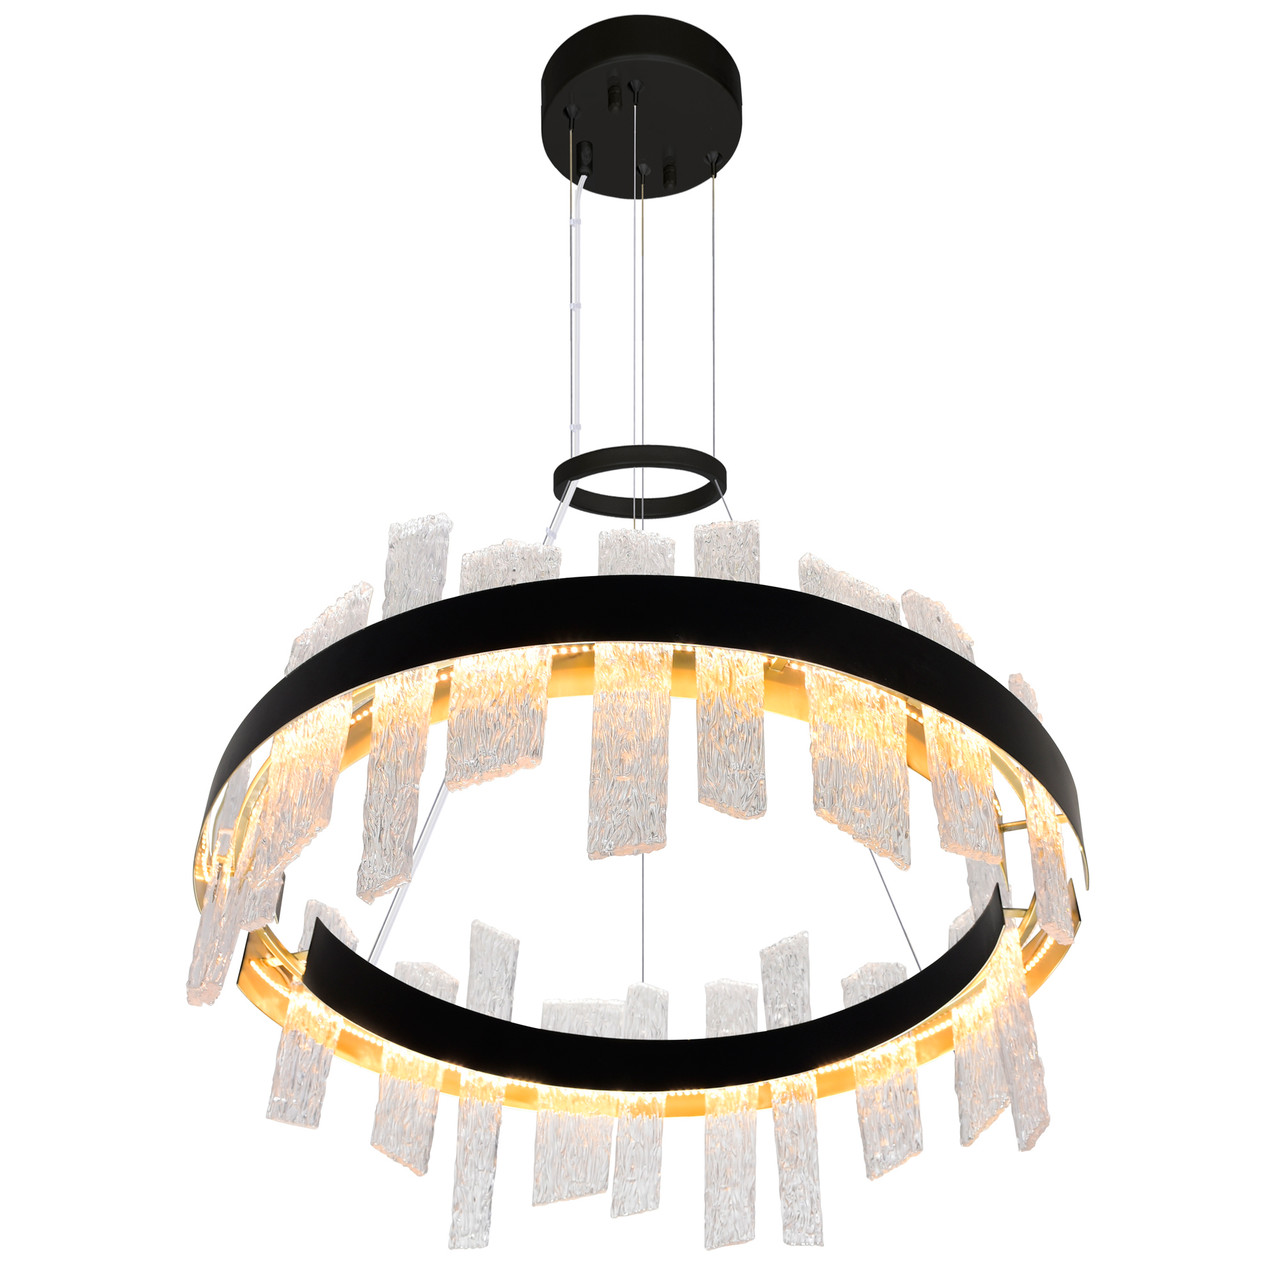 CWI LIGHTING 1246P32-101 Guadiana 32 in LED Black Chandelier